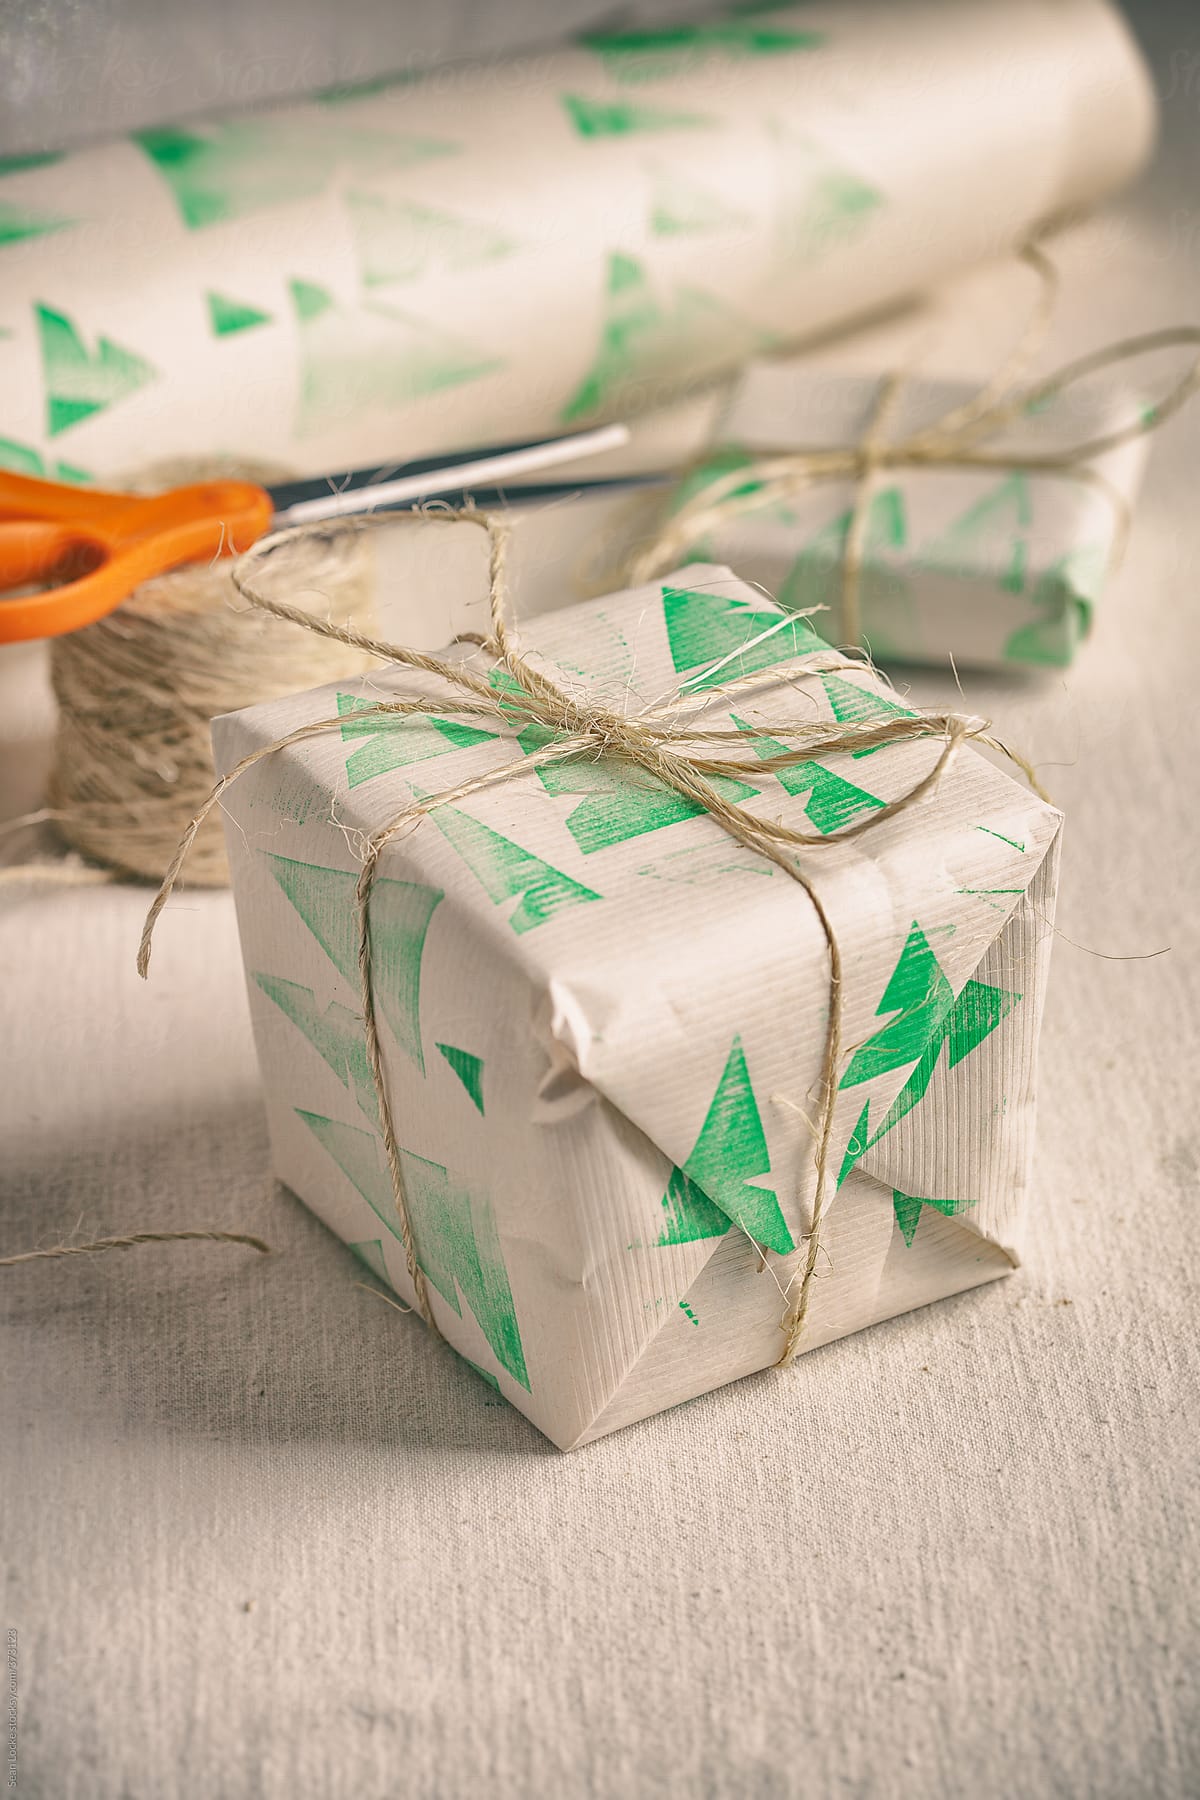 Wrapping: Using Handmade Wrapping Paper And String On Gifts